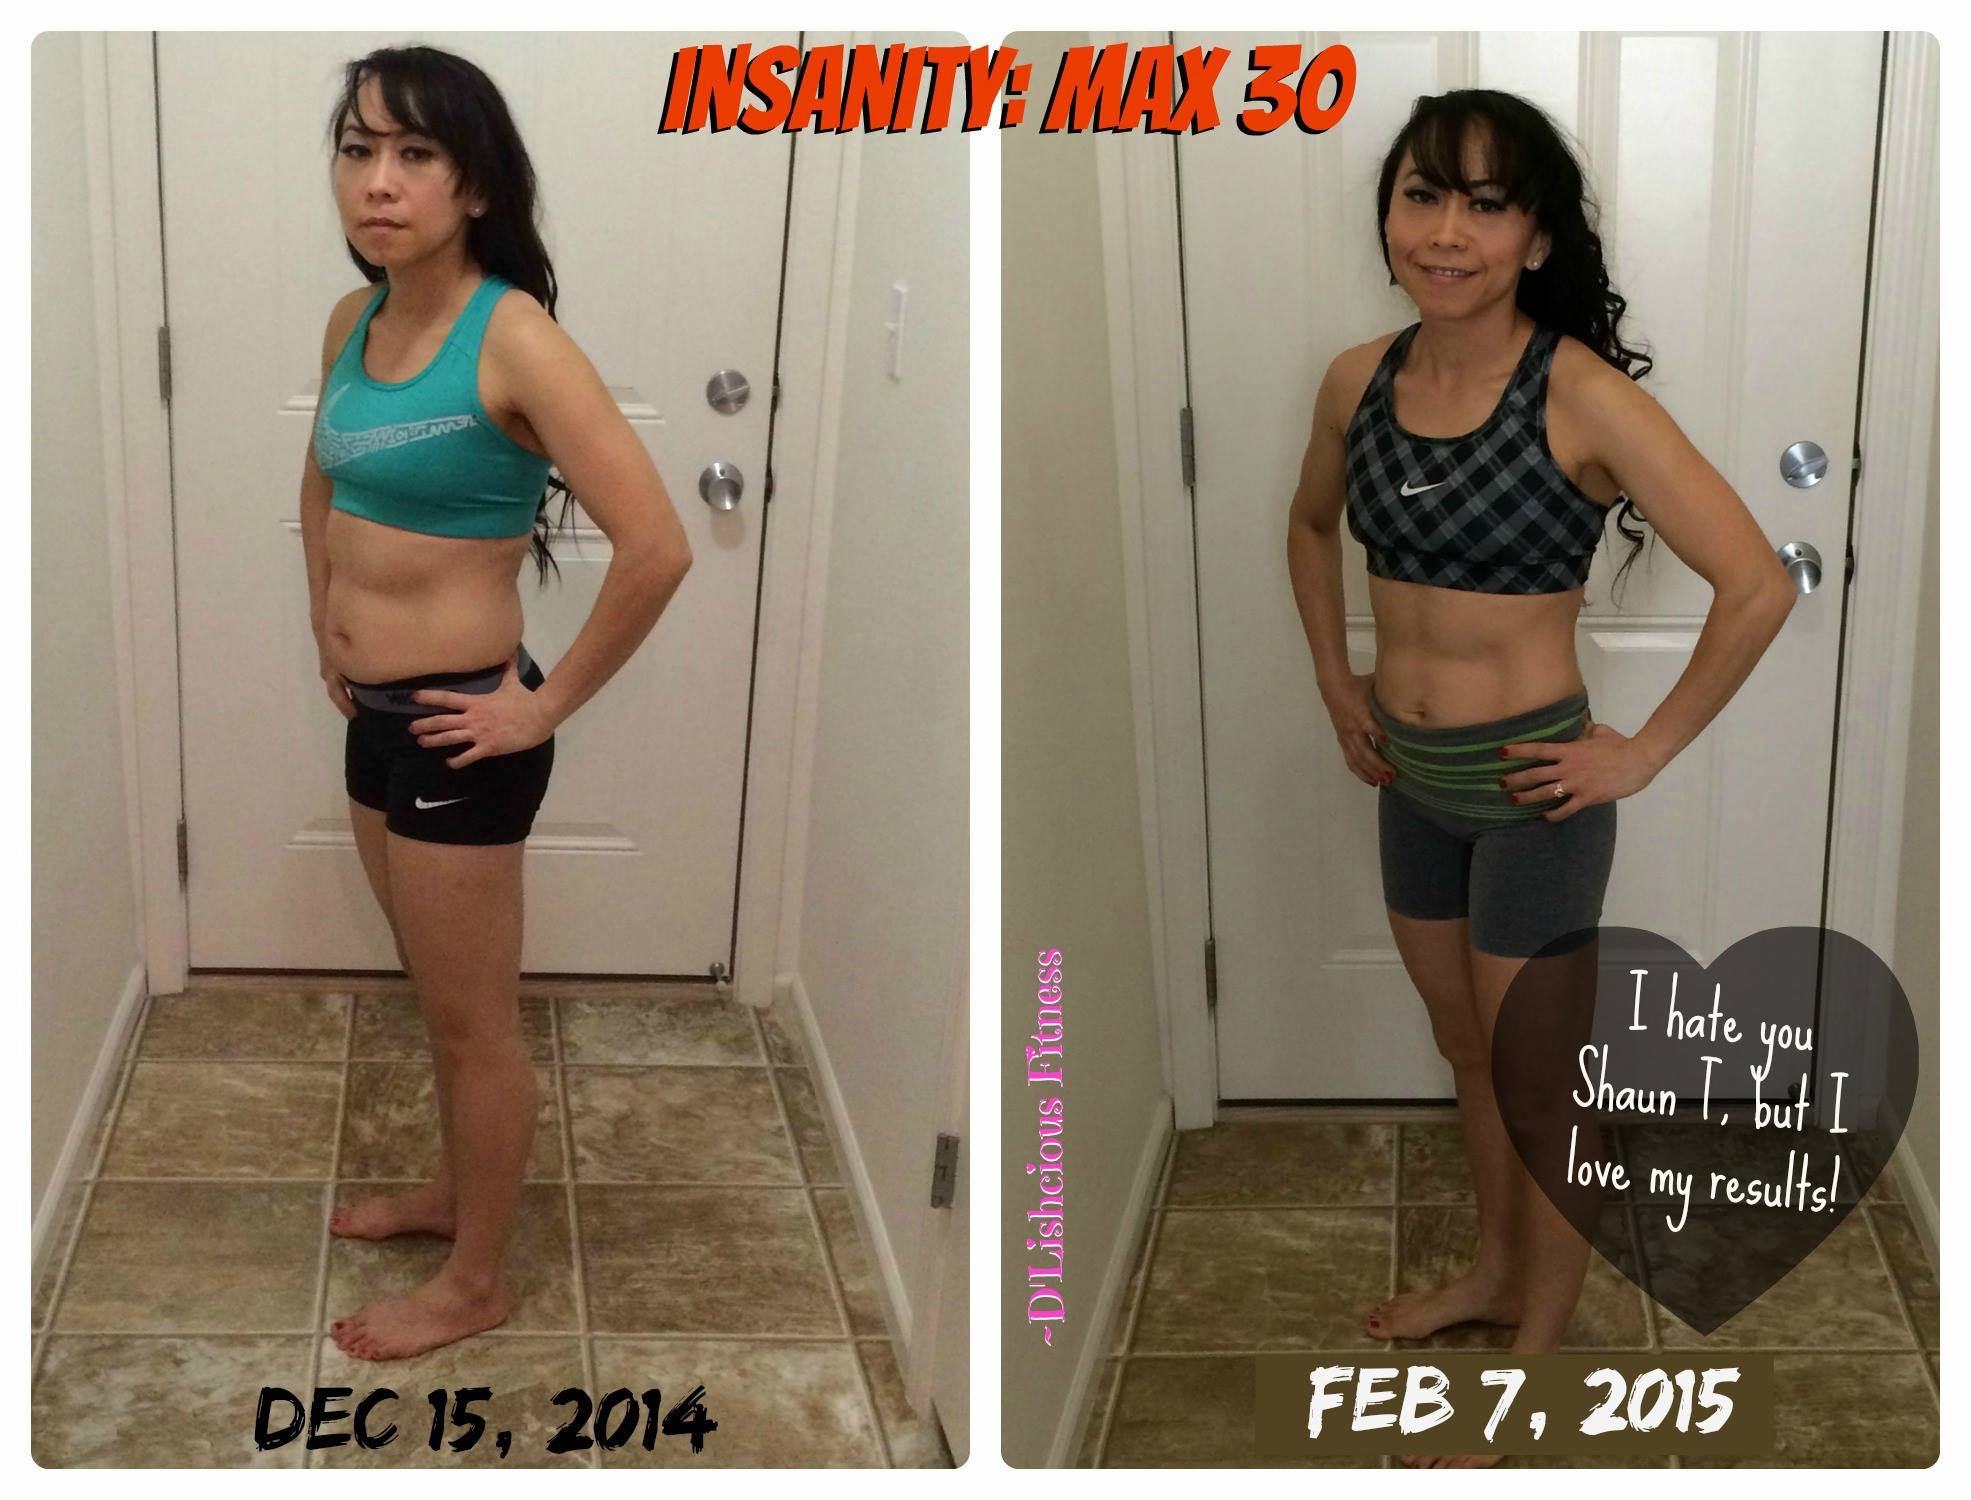 Female Insanity Max 30 Results